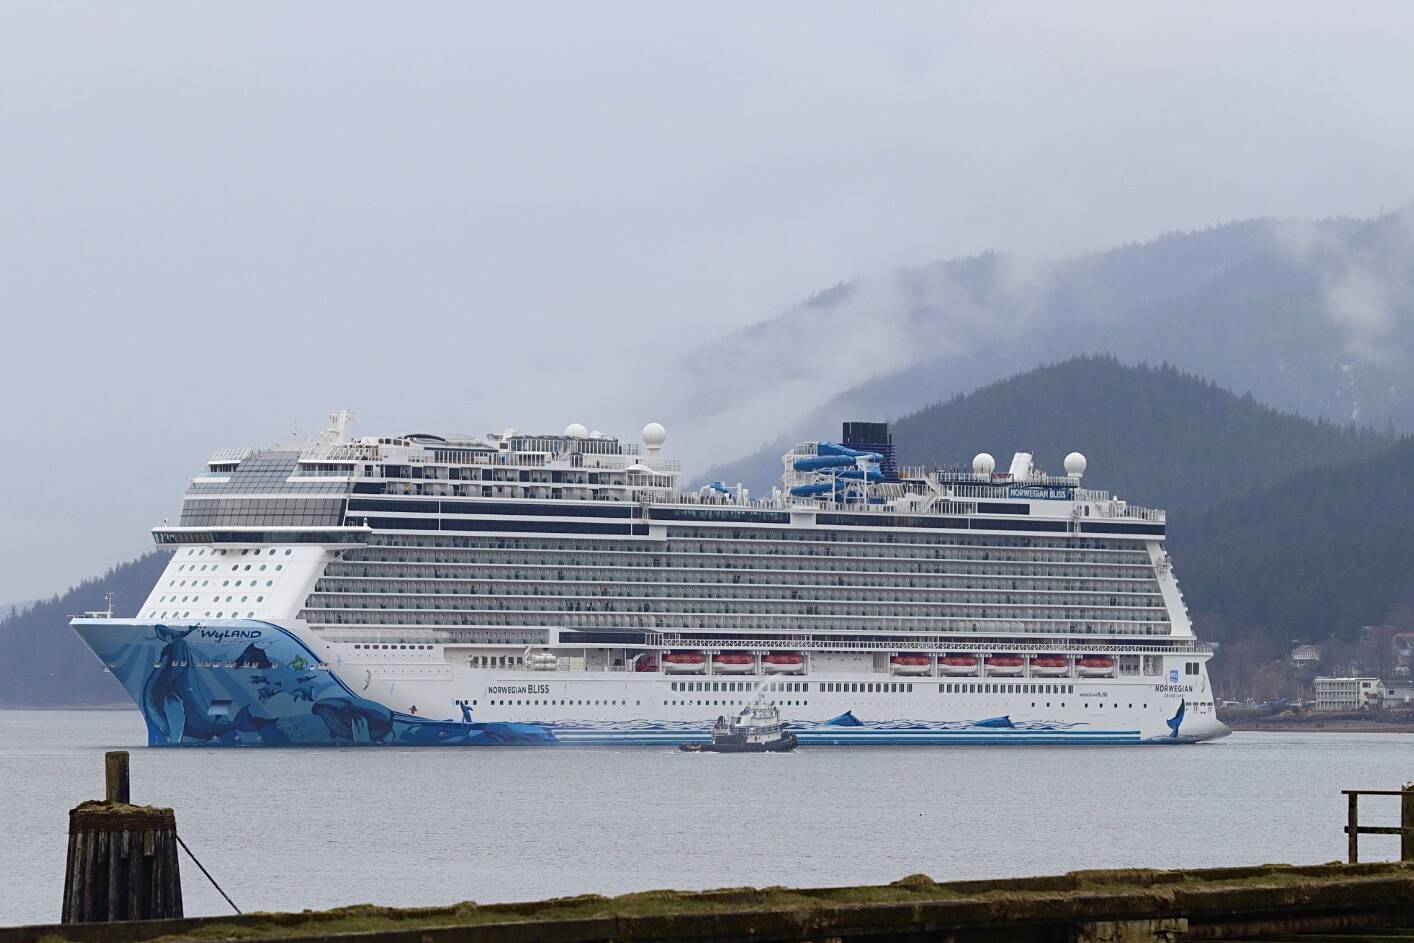 A tugboat sprays its water cannons in welcome as the Norwegian Bliss arrives in Juneau on April 25, 2022, the first cruise of the 2022 season. (Michael S. Lockett / Juneau Empire)